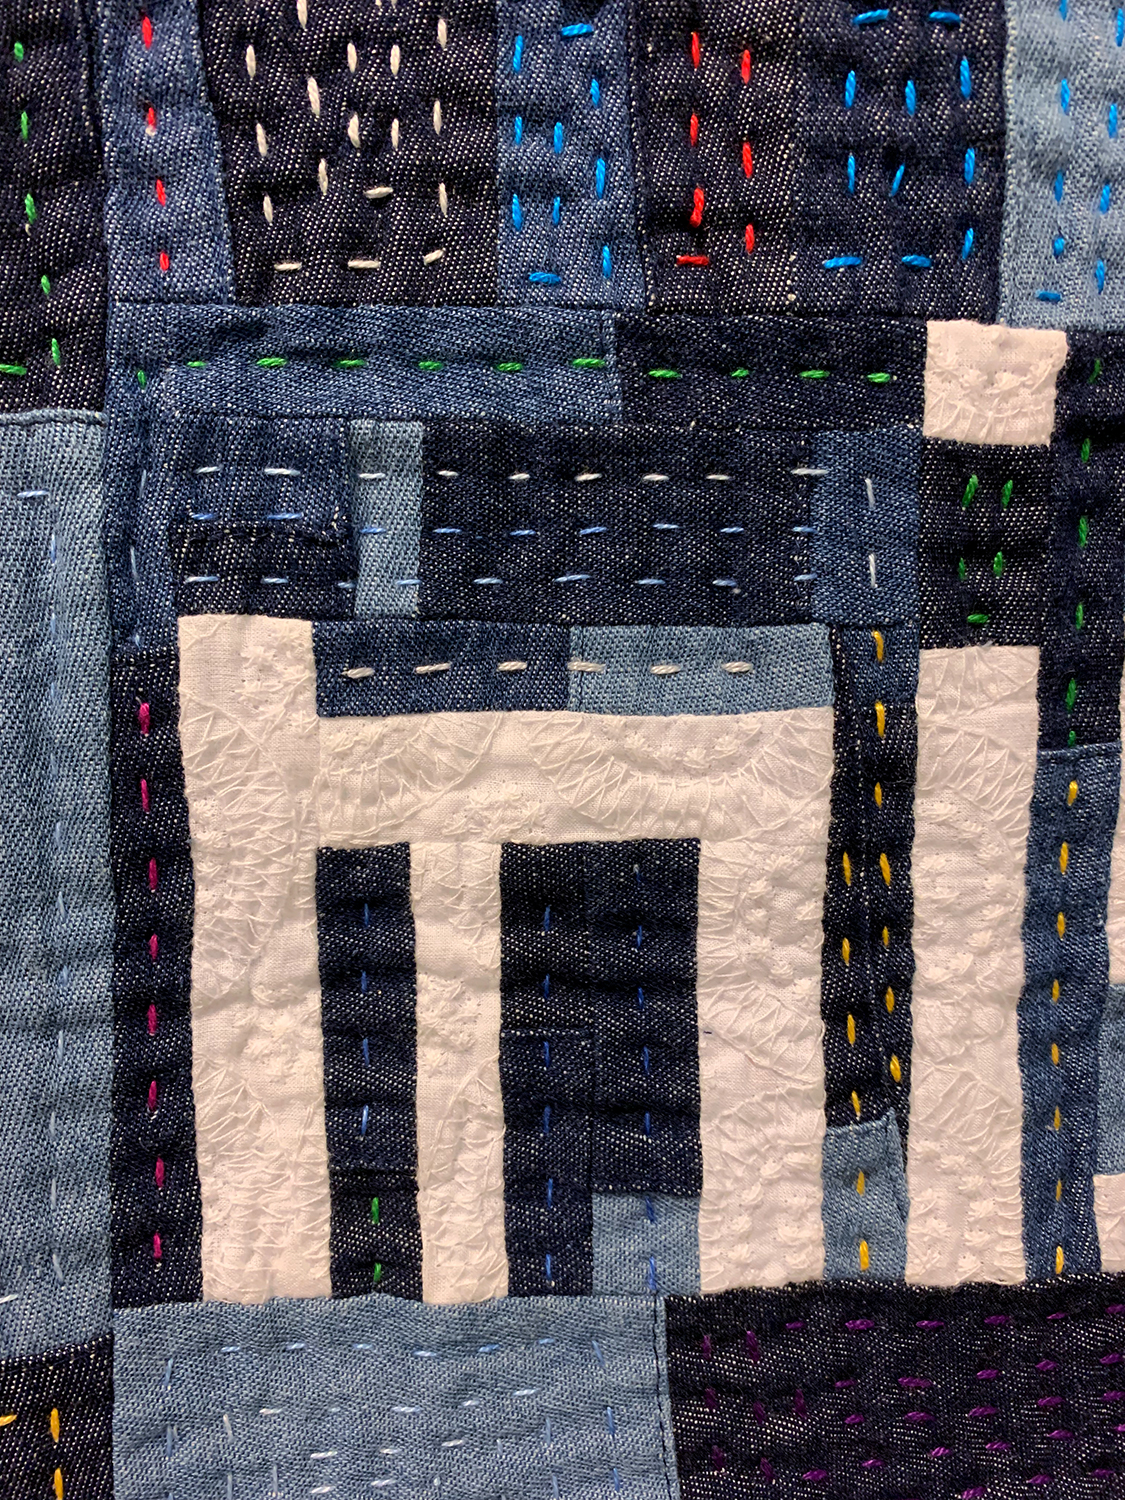 detail of improvisational quilt made with denim and cotton stating "i miss hope" in the middle